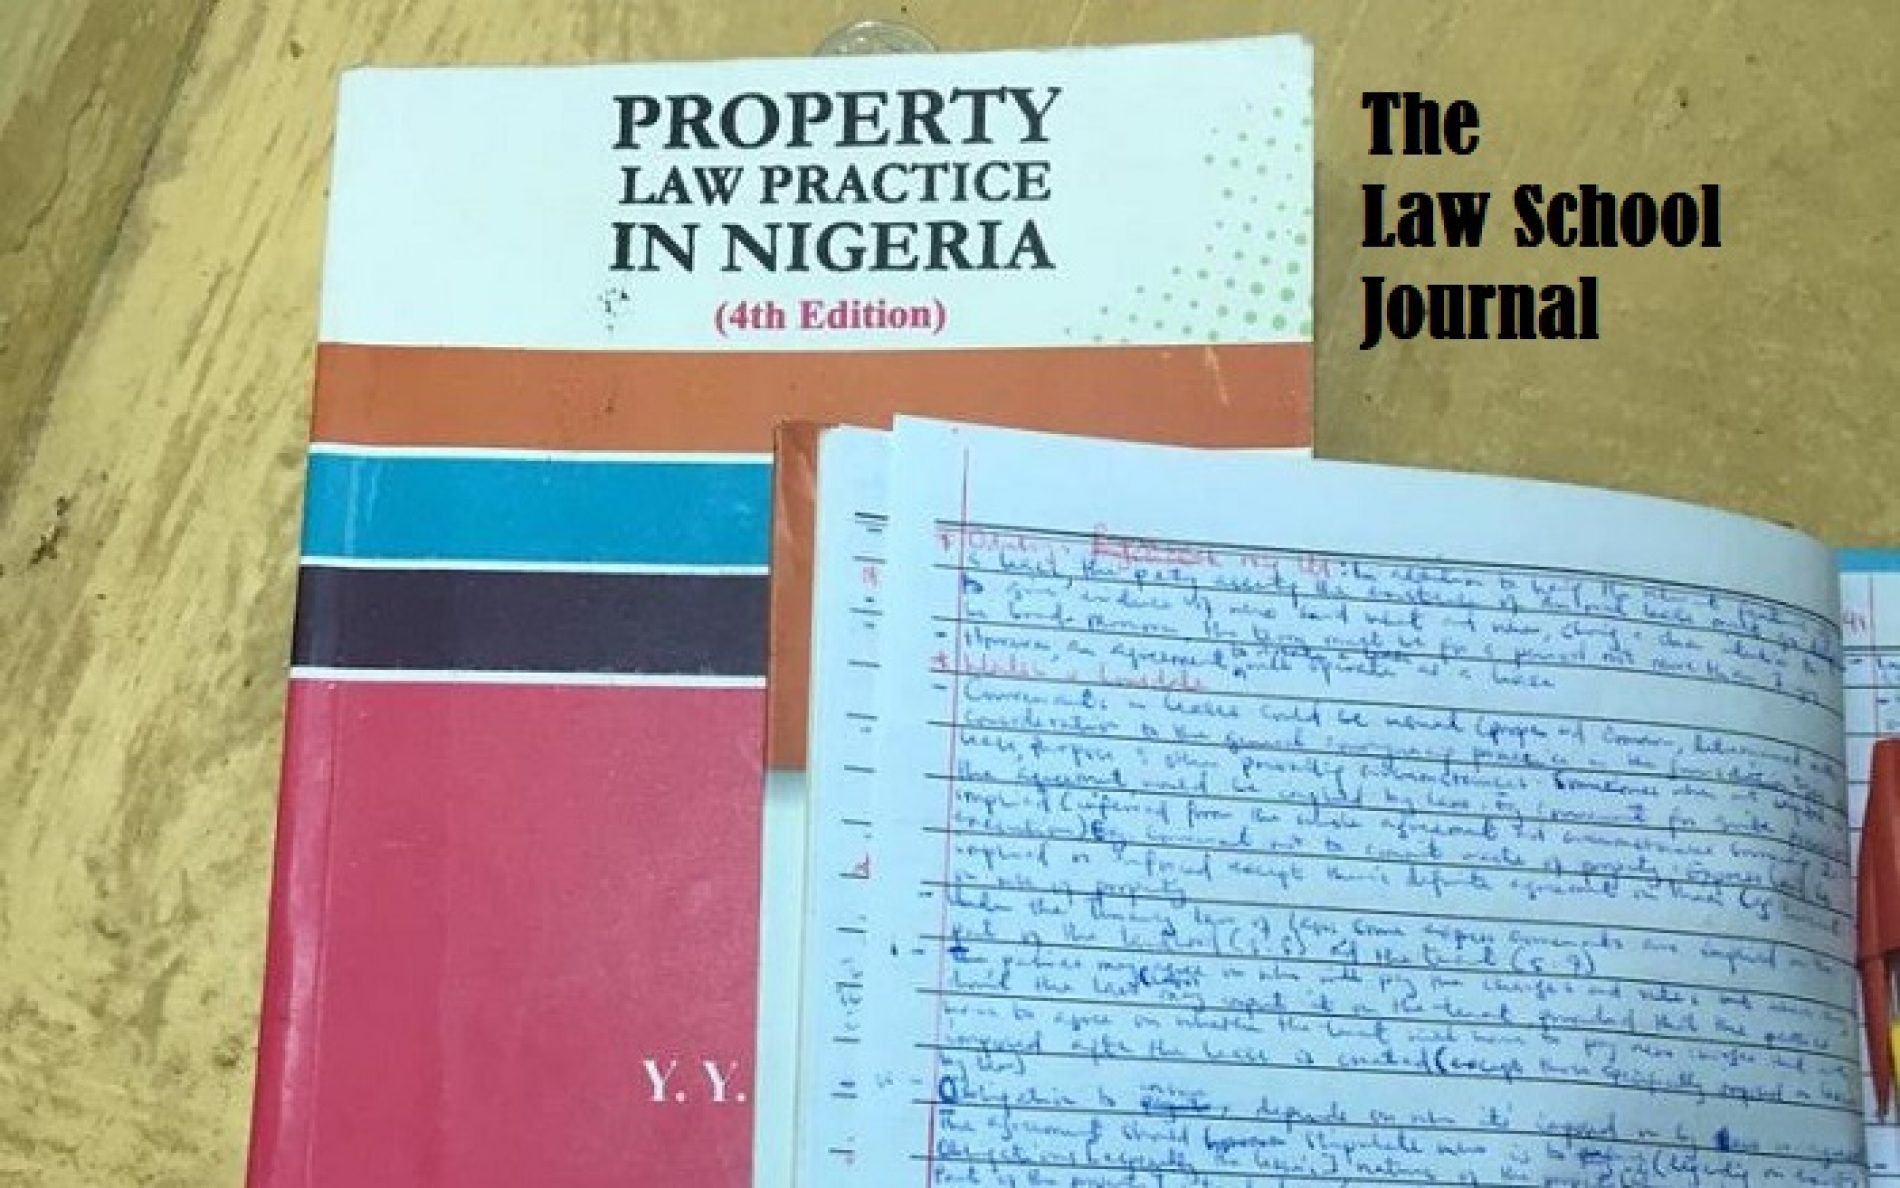 The Law School Journal (Entry 3)